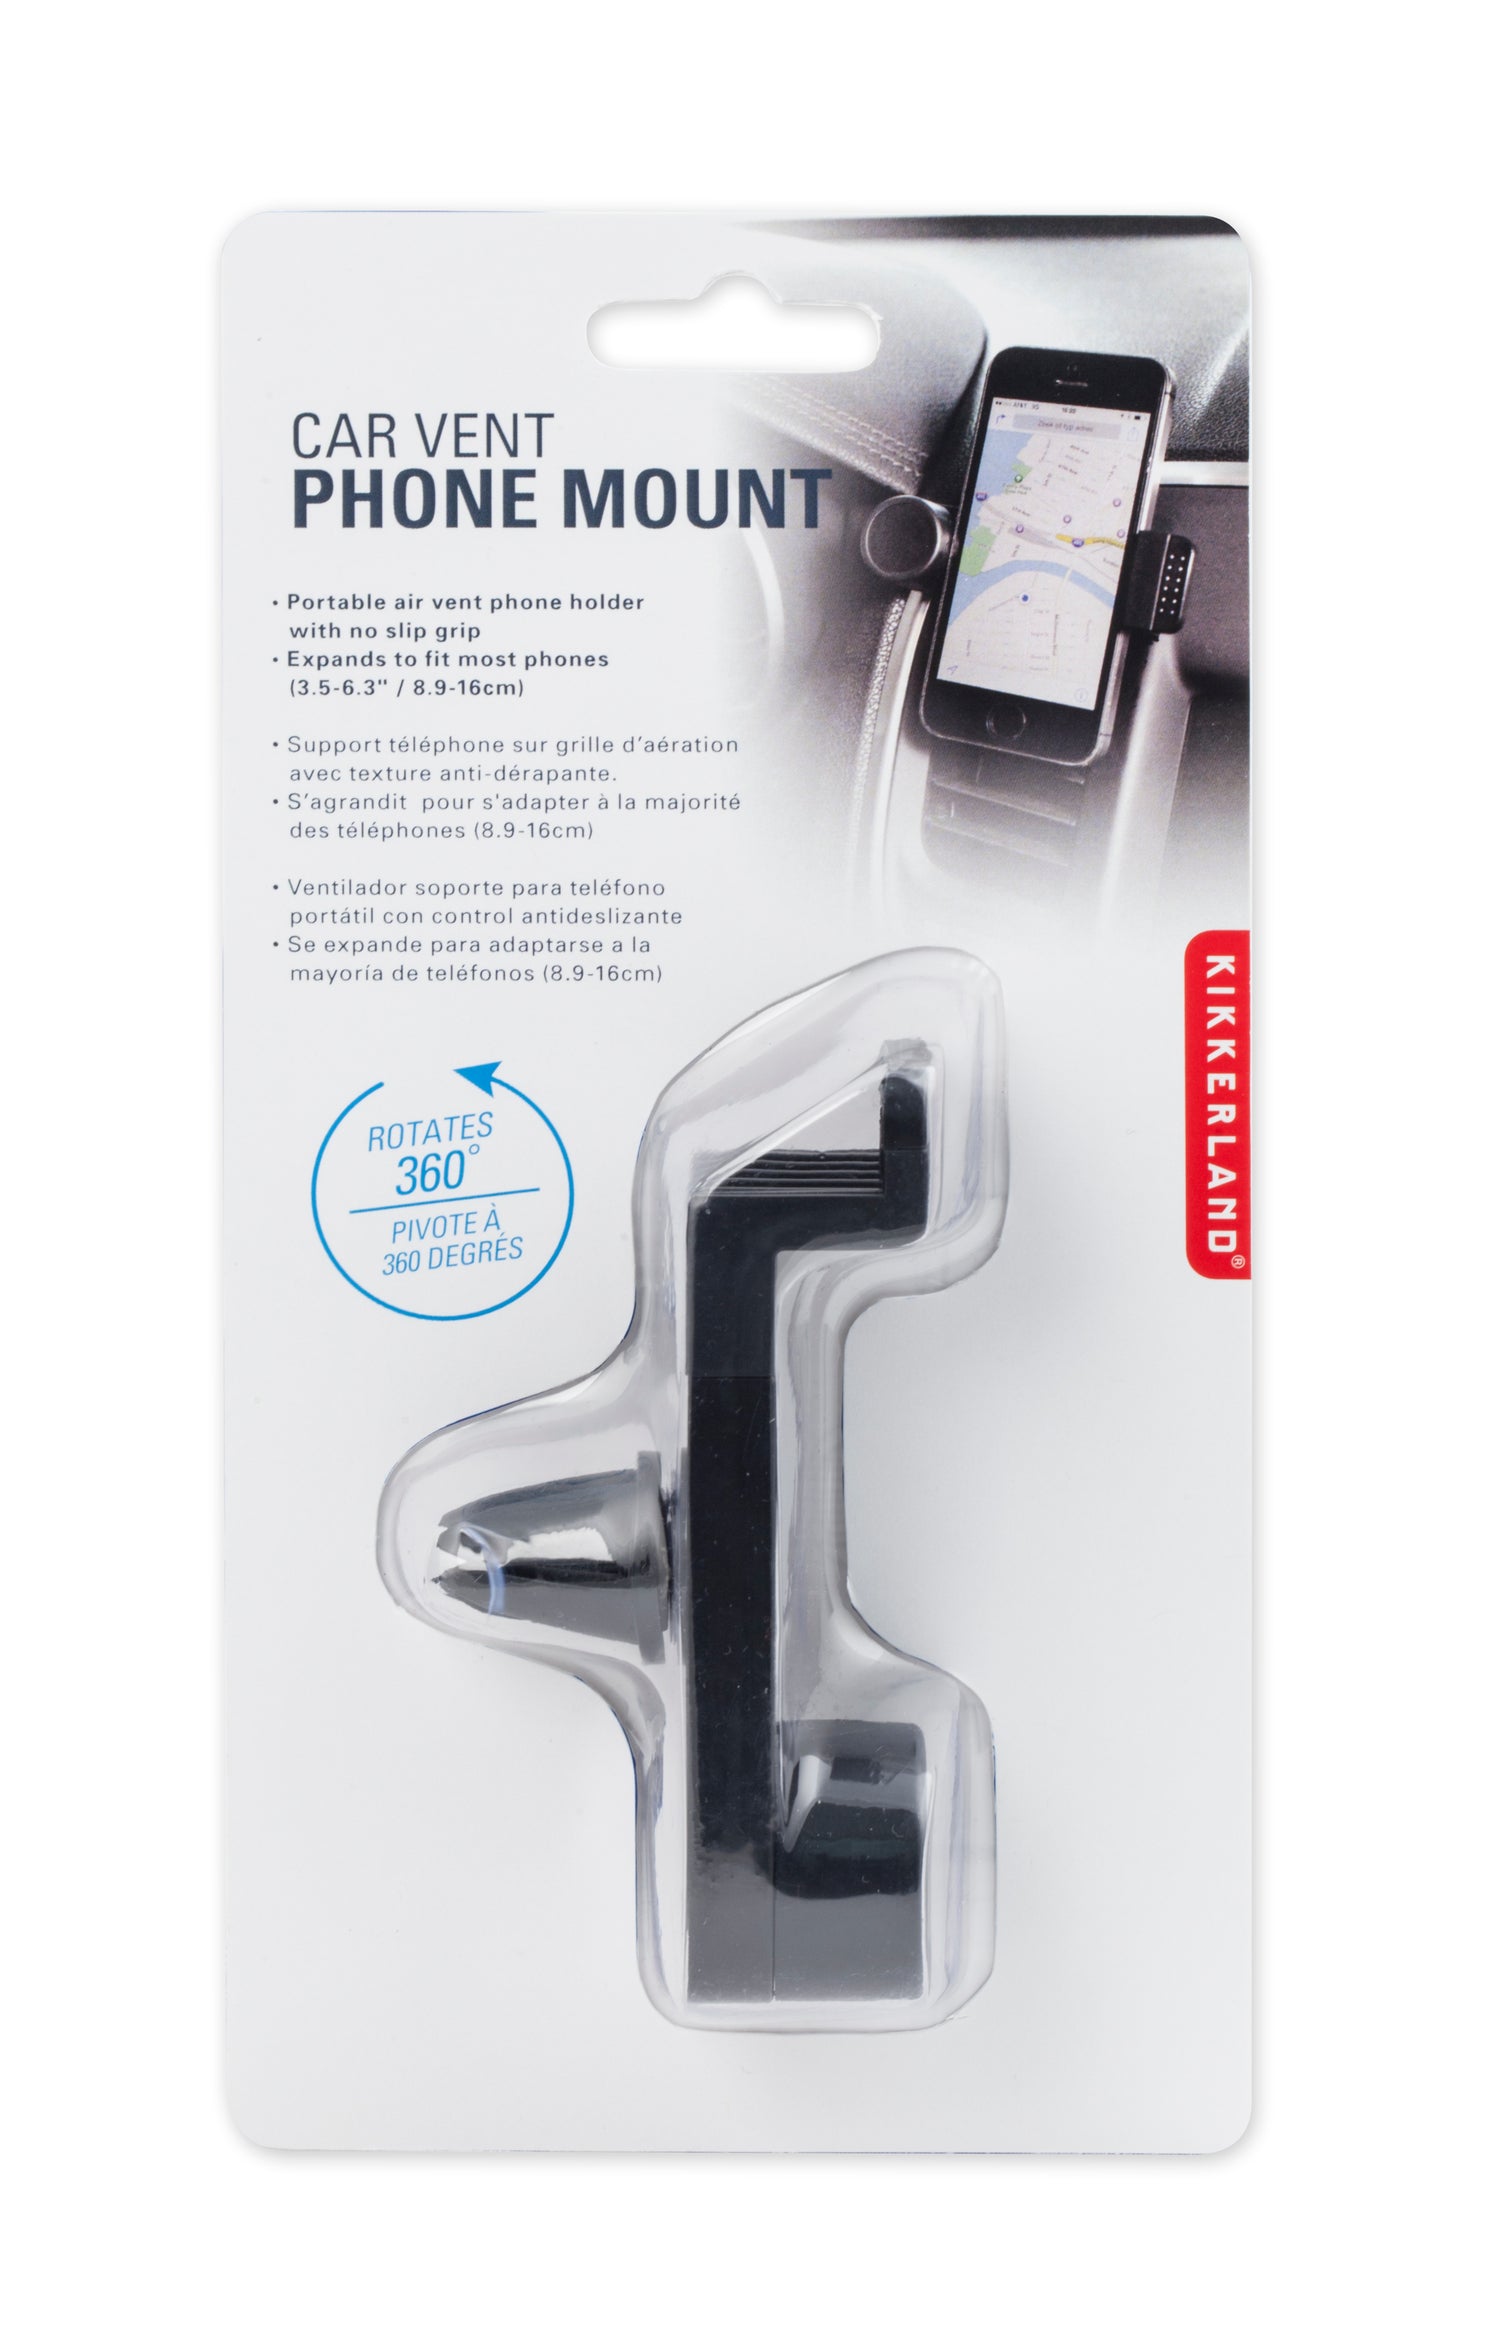 Magnetic Car Phone Holder Air Vent Clip Mount Rotation Cellphone